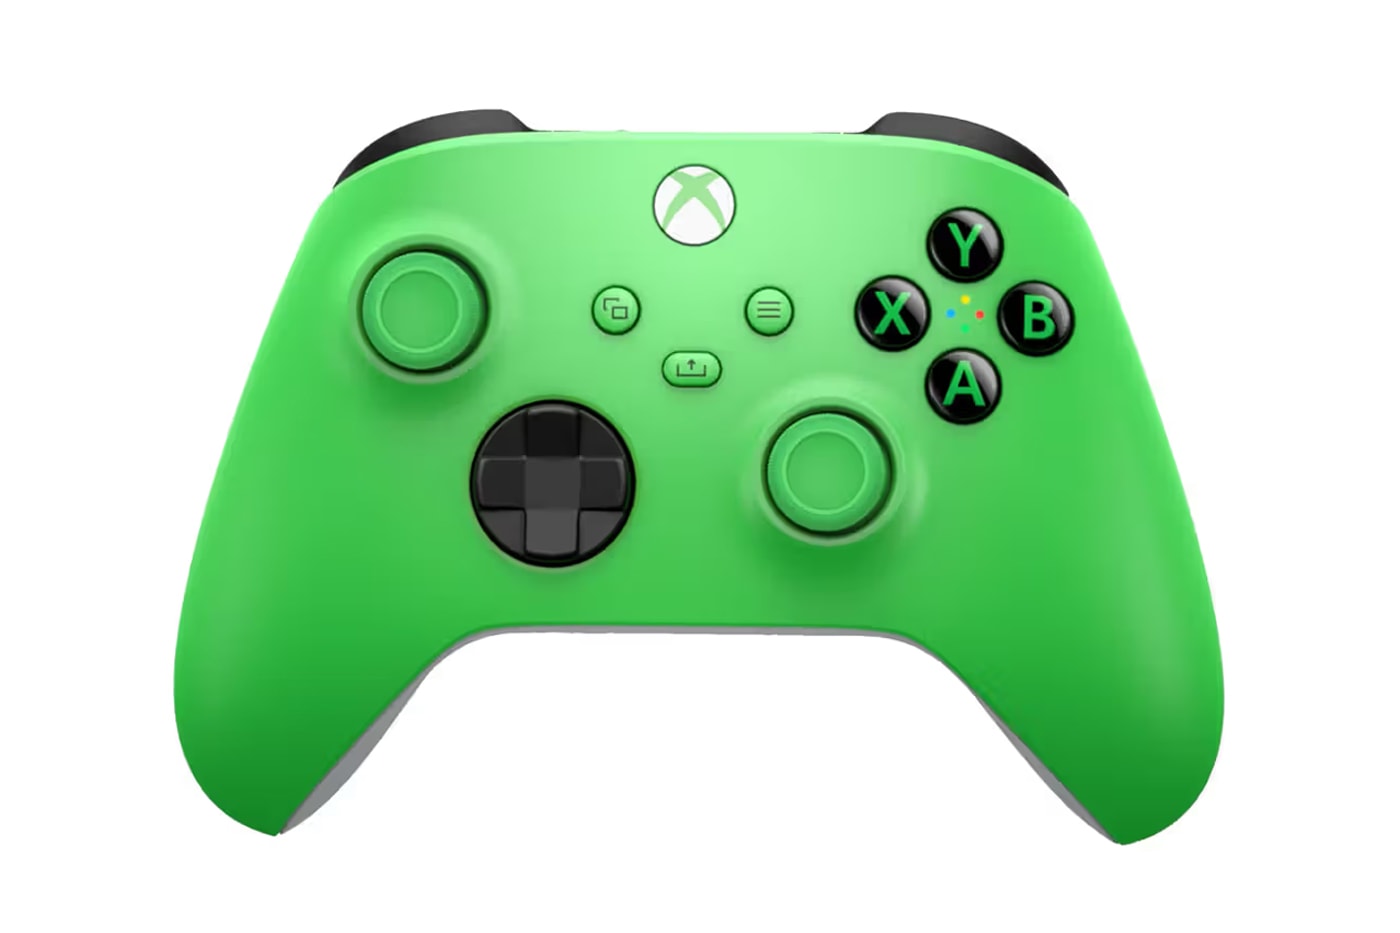 The cheap Xbox controllers of 2023